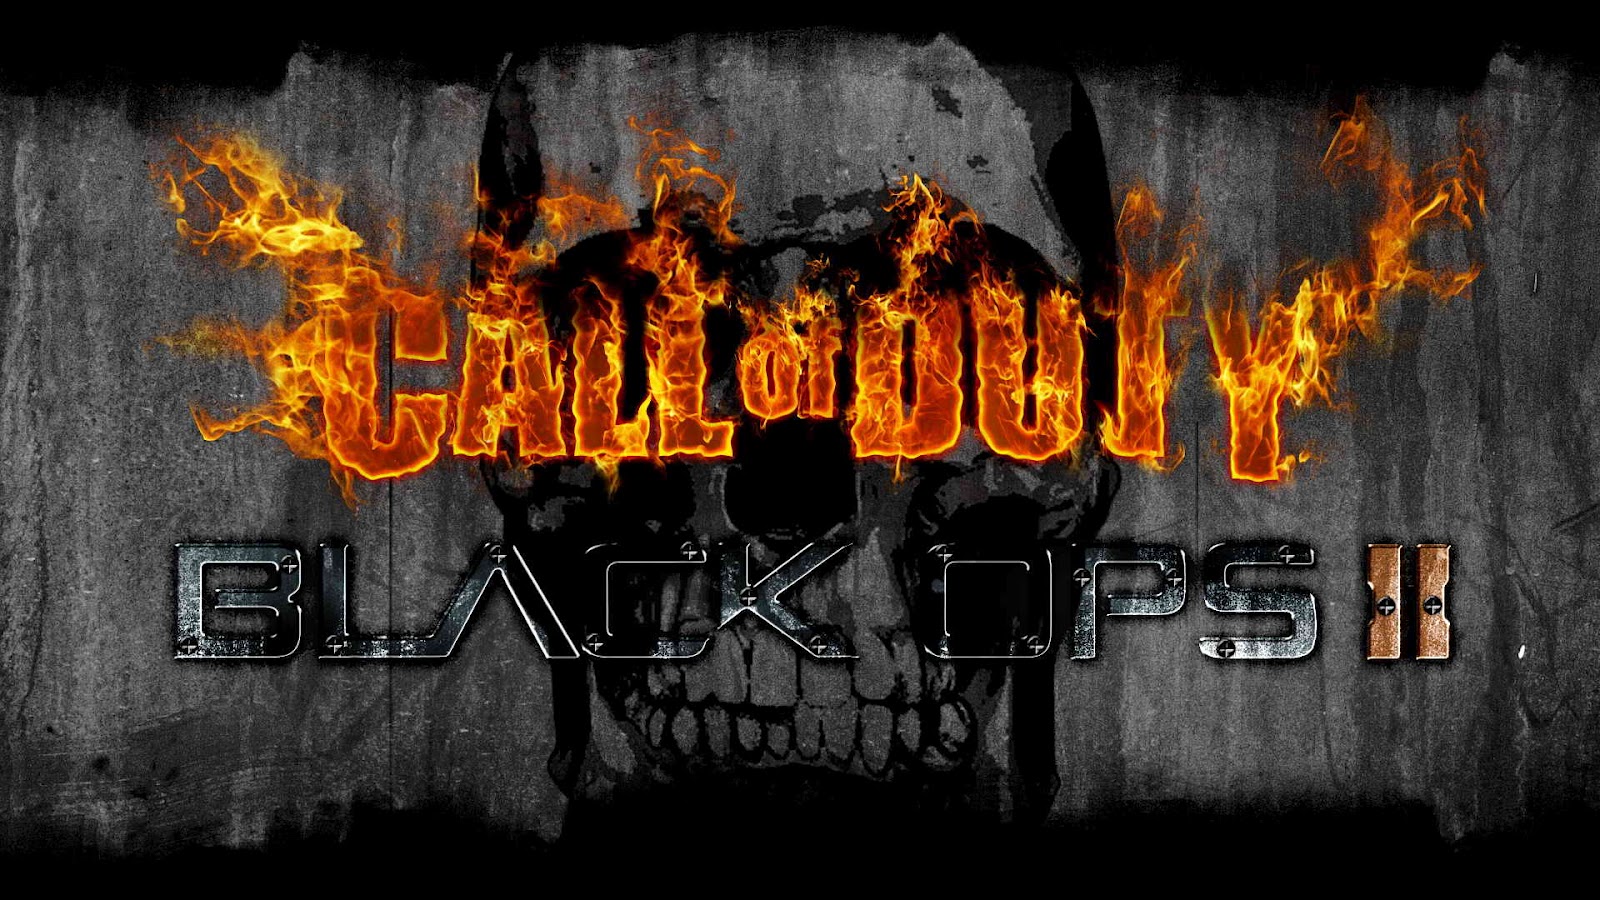 HD WALLPAPERS Call of Duty Black ops HD Wallpapers